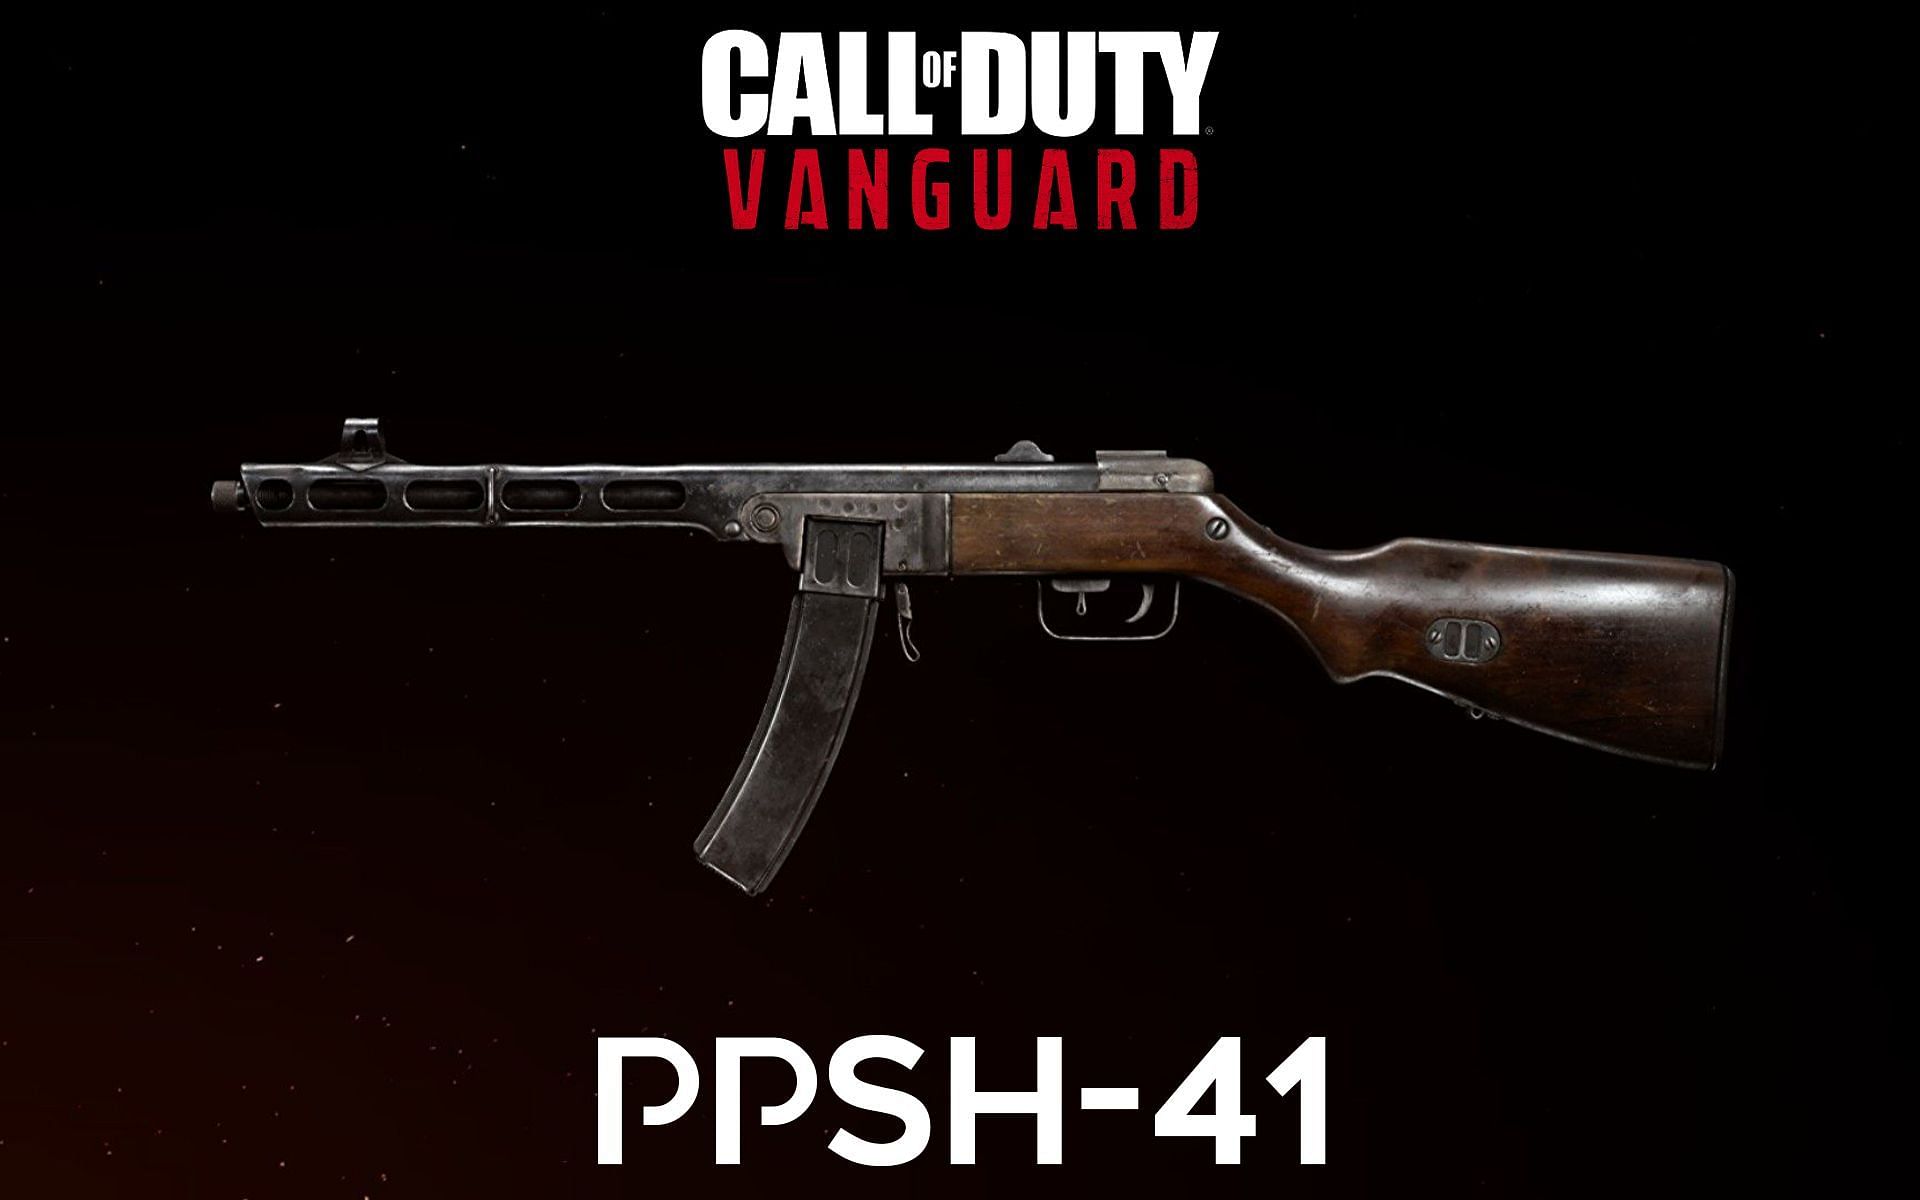 PPSh-41 is one of the best SMGs in Call of Duty: Vanguard (Image by Activision)